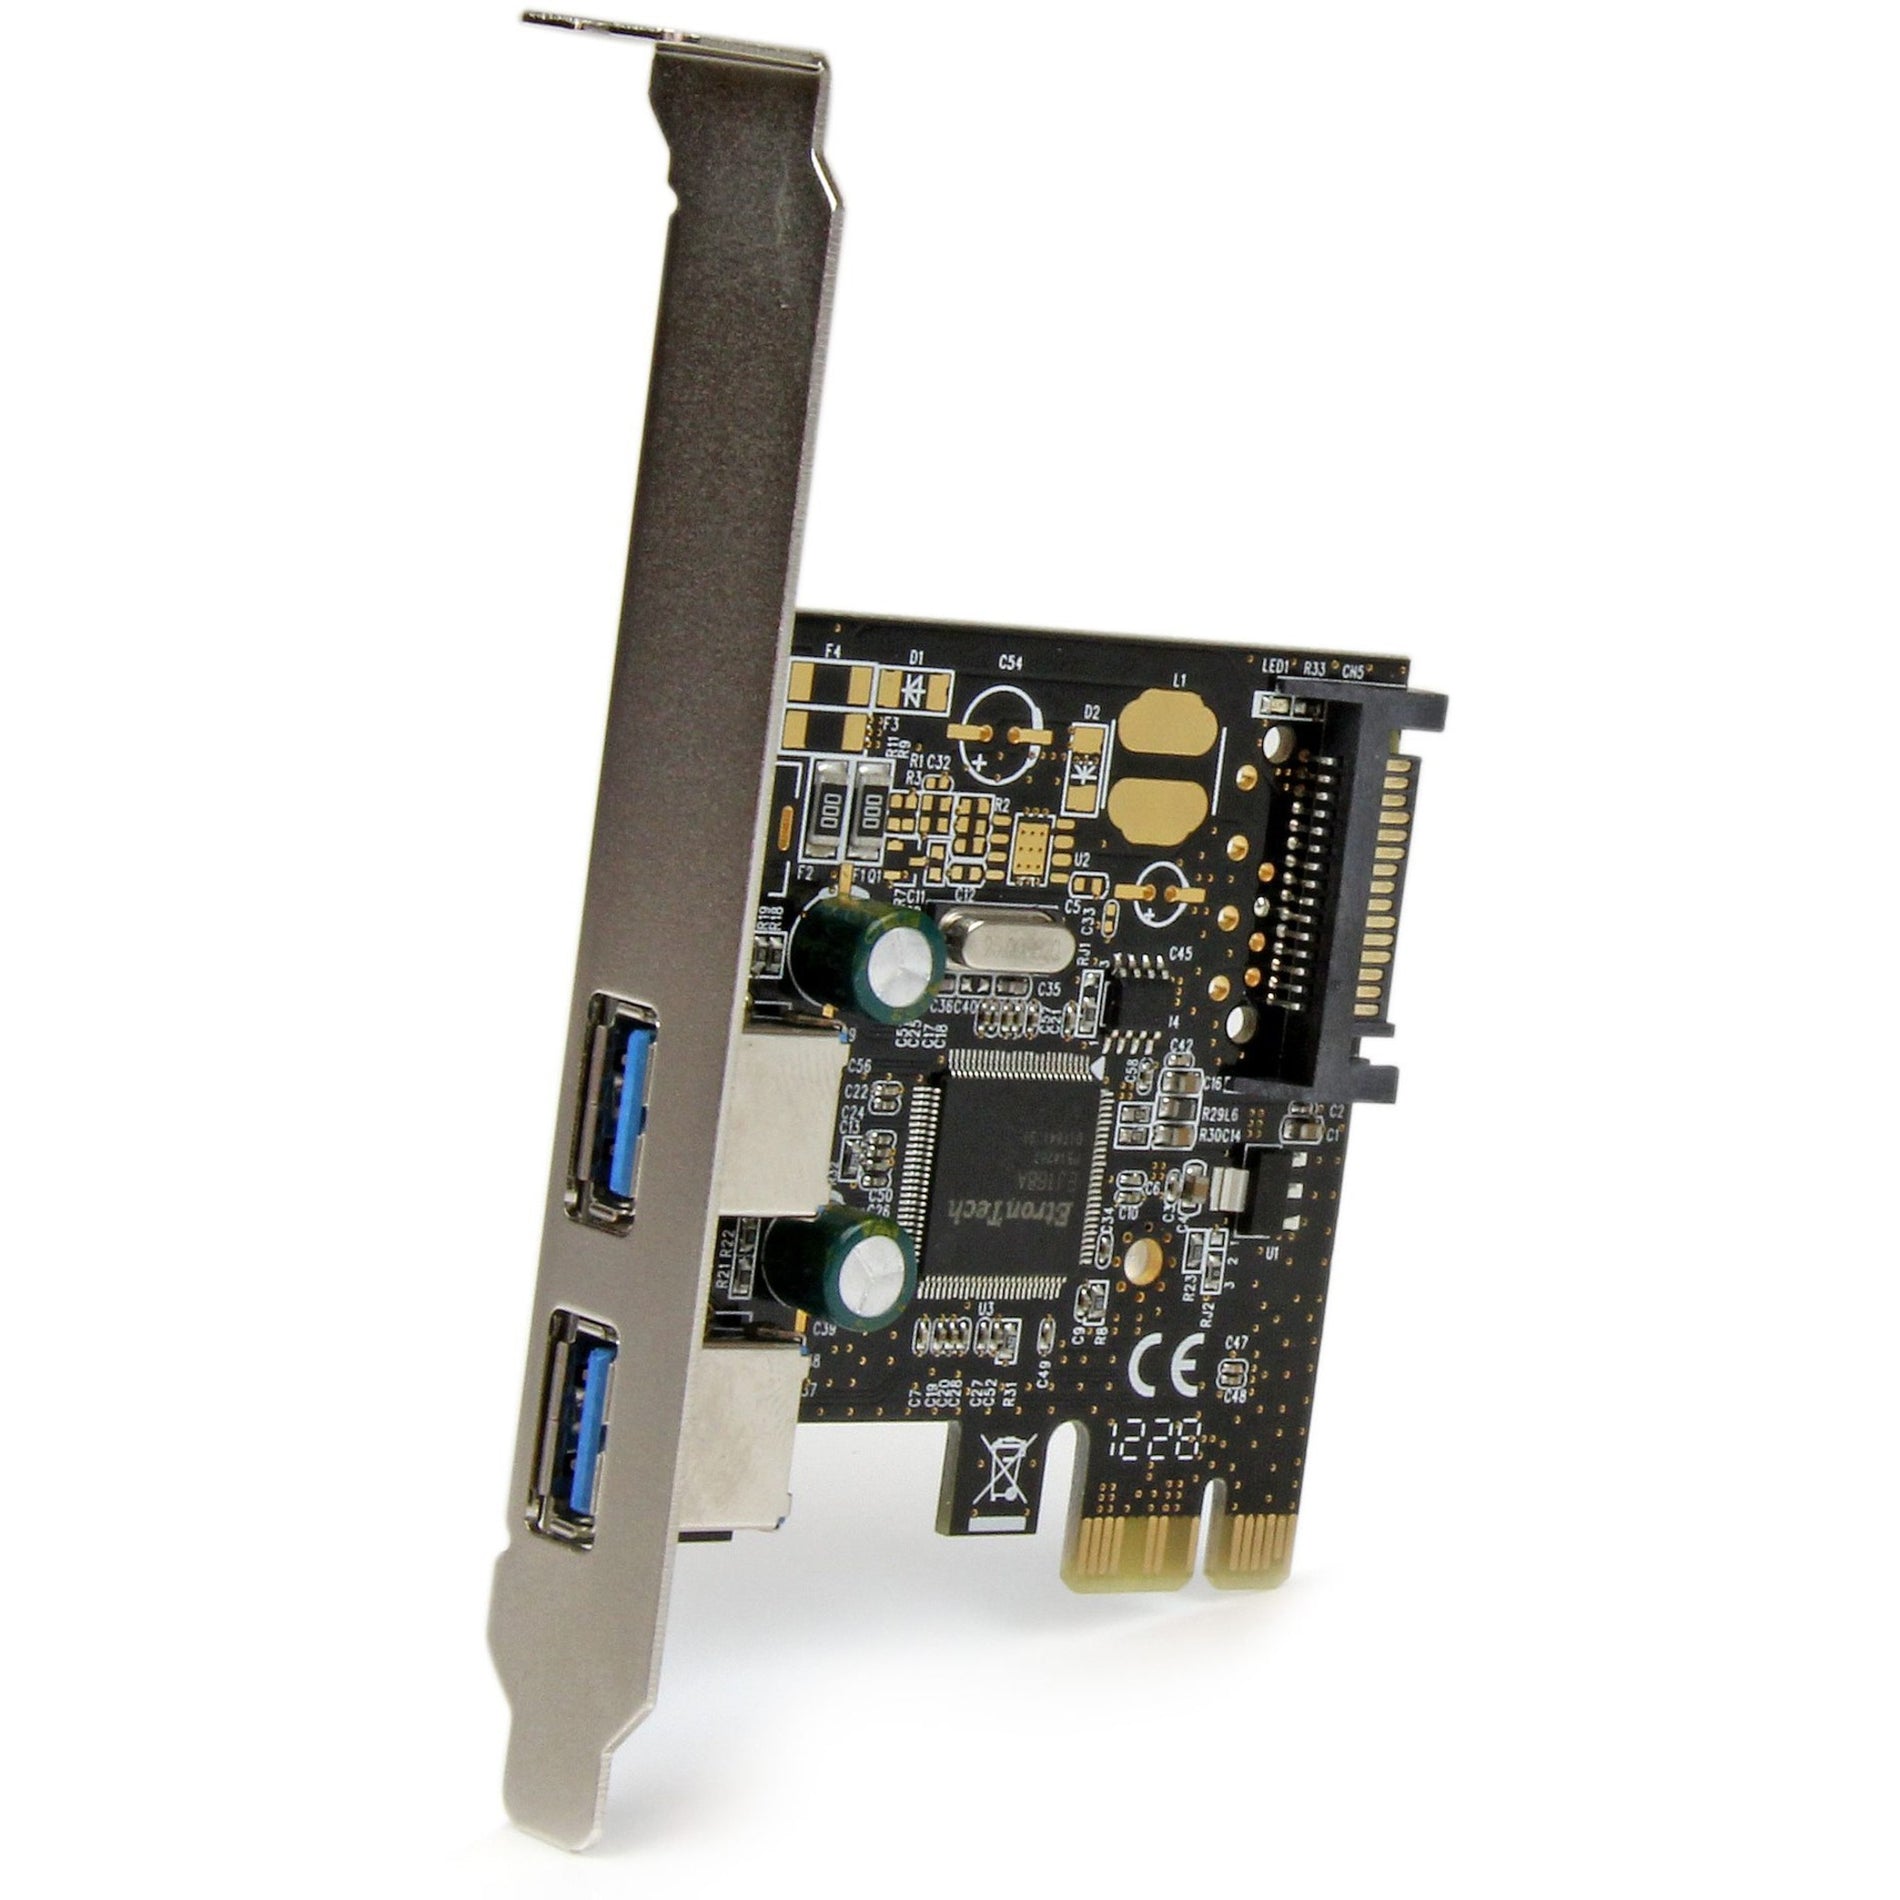 StarTech.com PEXUSB3S23 2 Port PCI Express PCIe USB 3.0 Controller Card w SATA Power, SuperSpeed (5Gbps) Plug-in Card